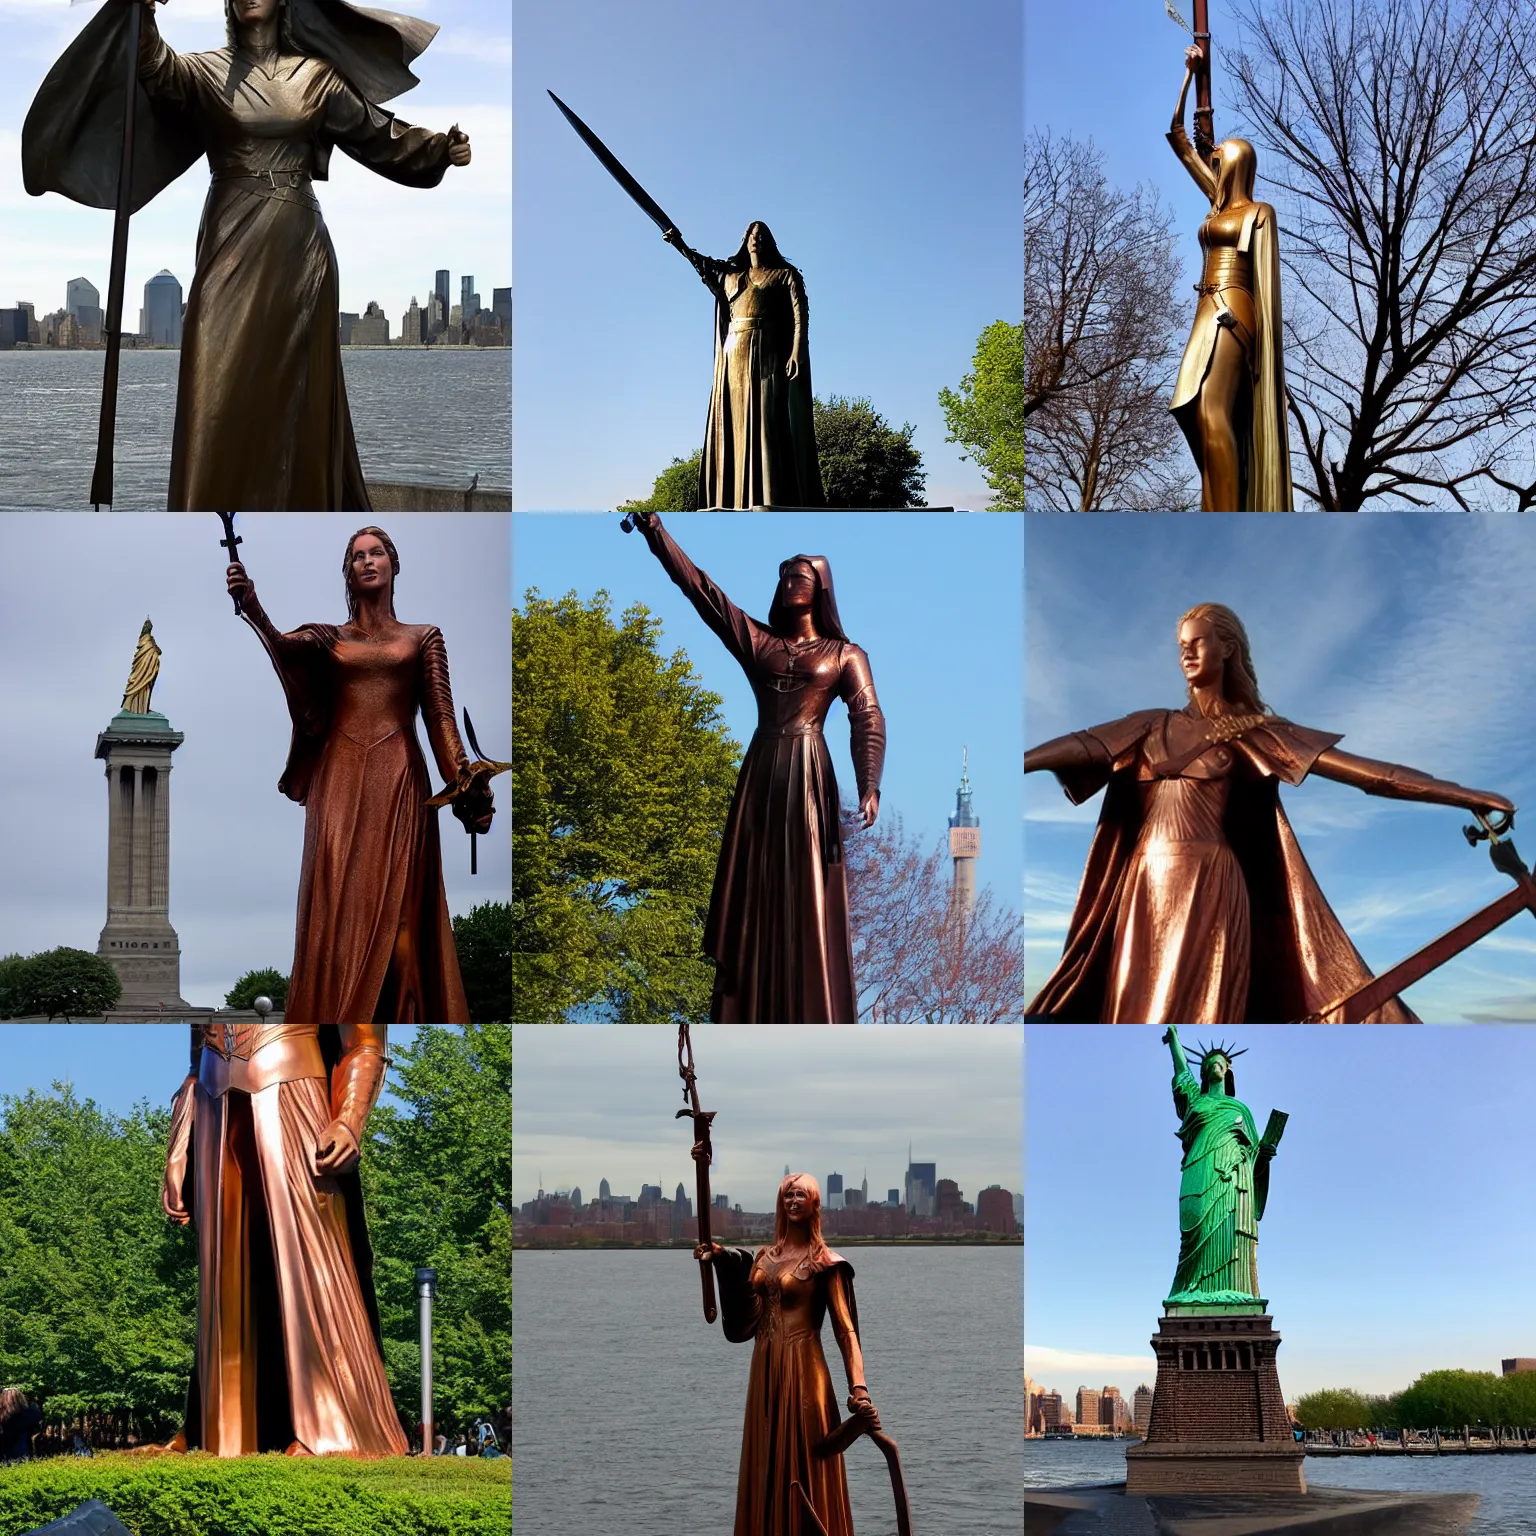 Prompt: Giant 30-meter tall copper statue of Eowyn from Lord of the Rings, on Liberty Island, New York harbour, holding a sword